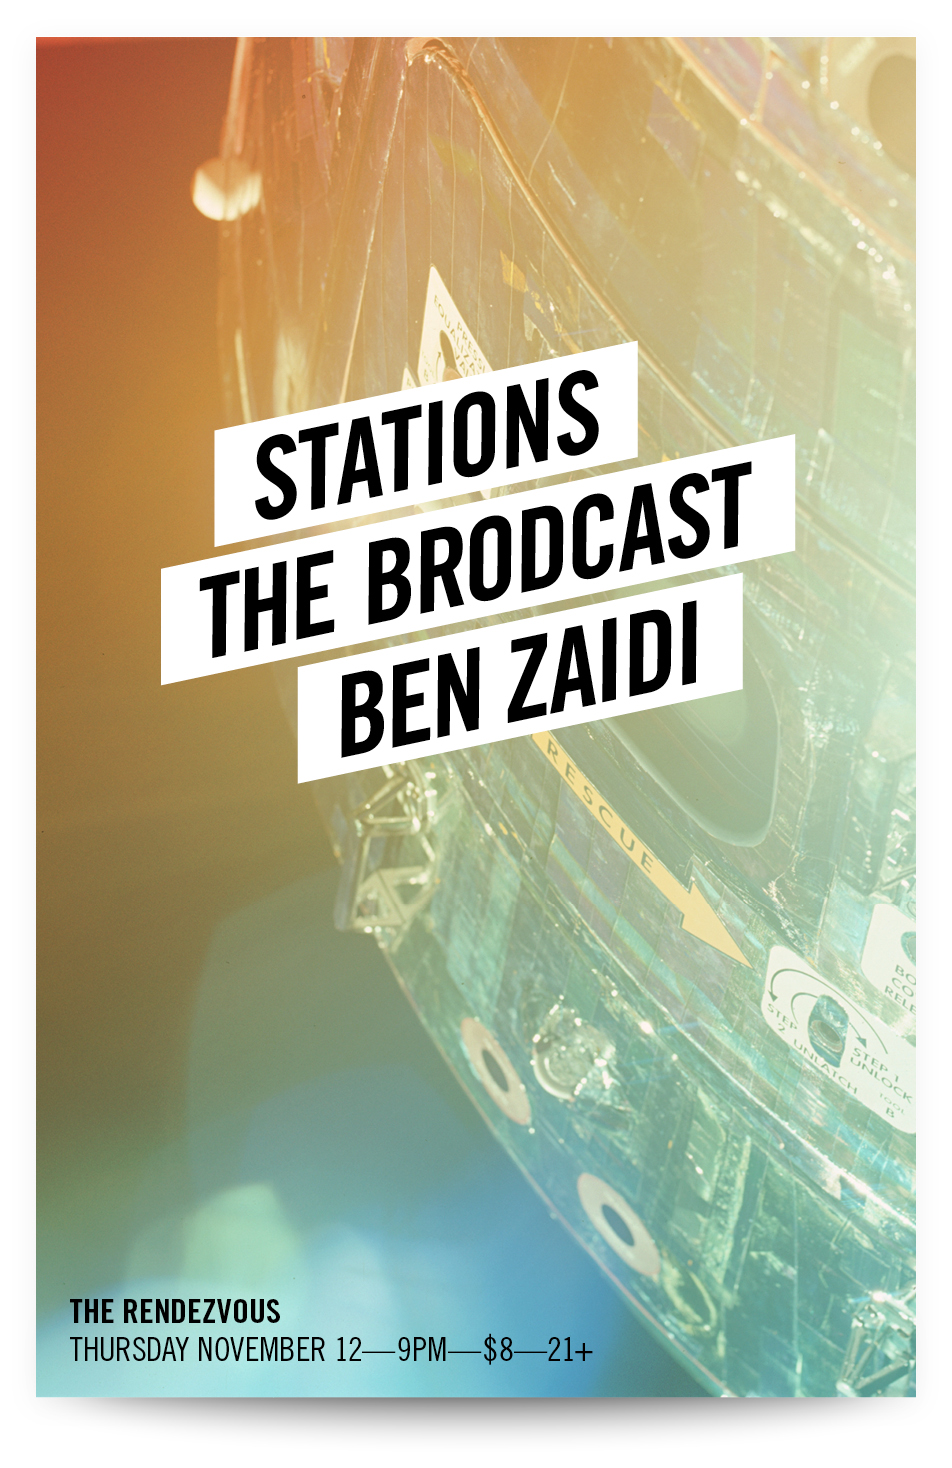 Stations band poster